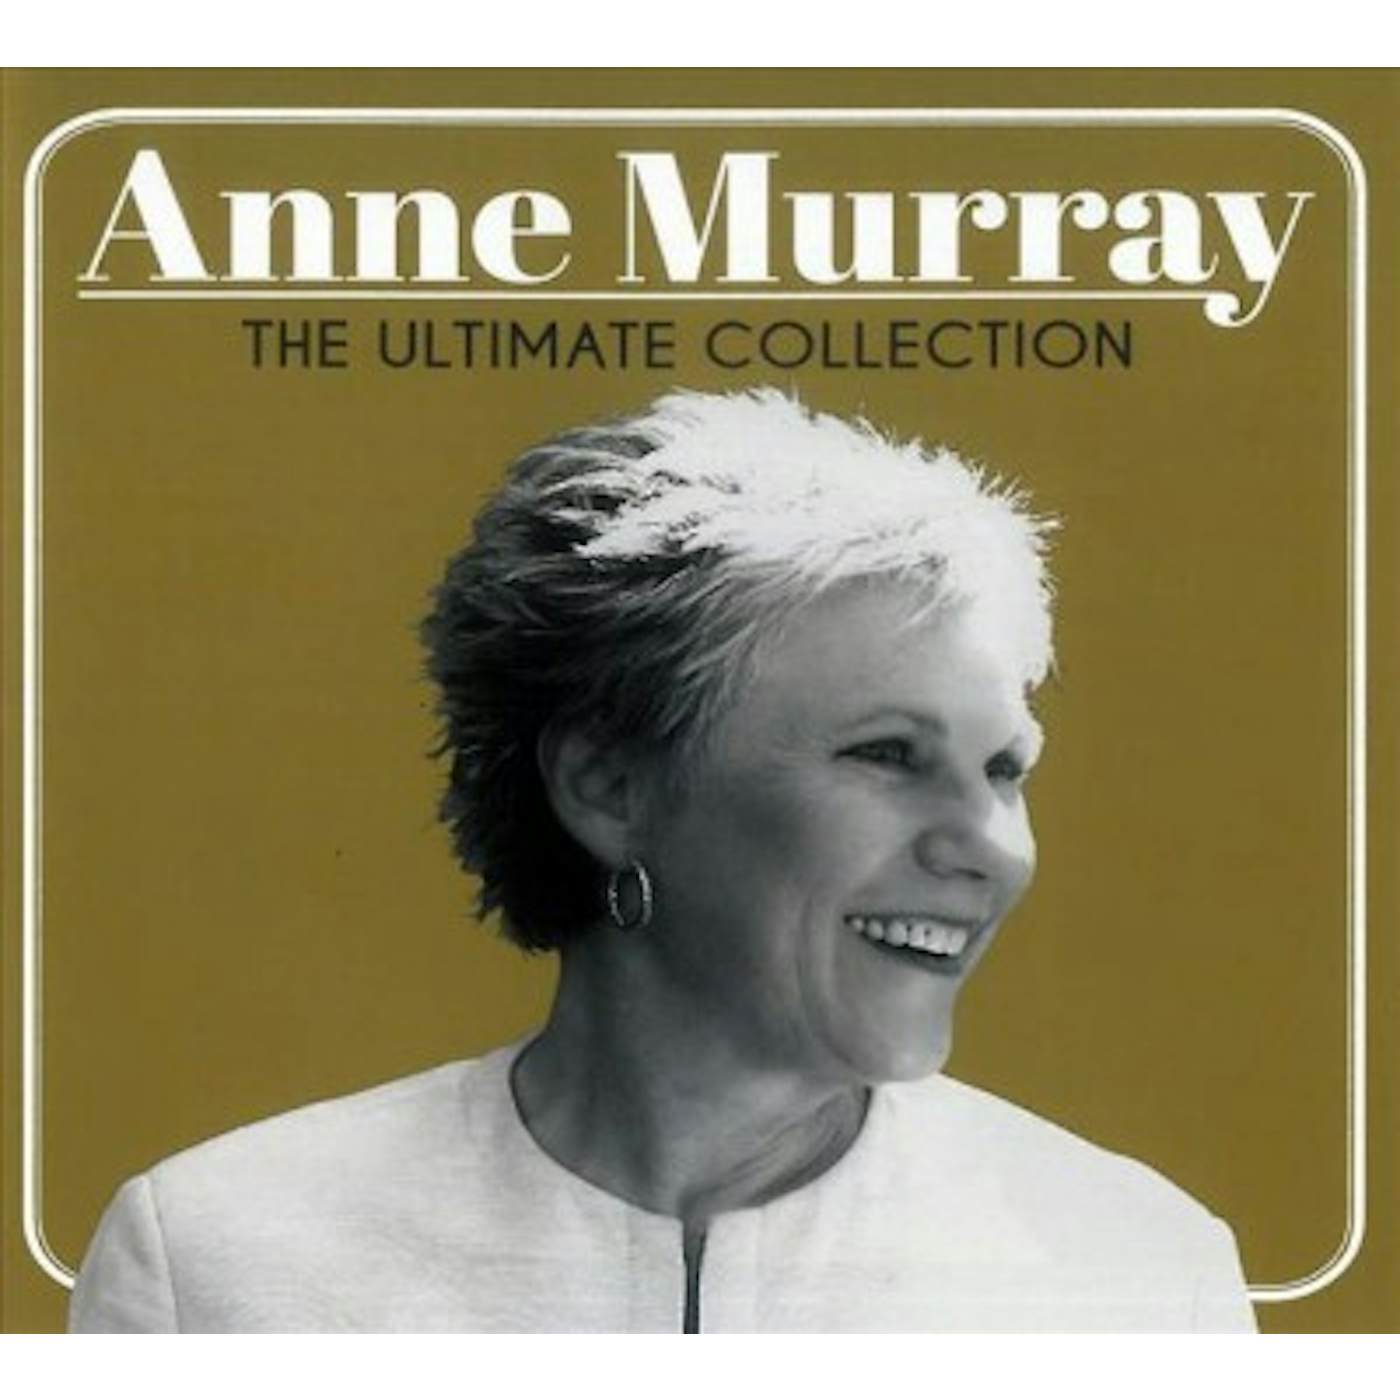 Anne Murray ULTIMATE COLLECTION CD